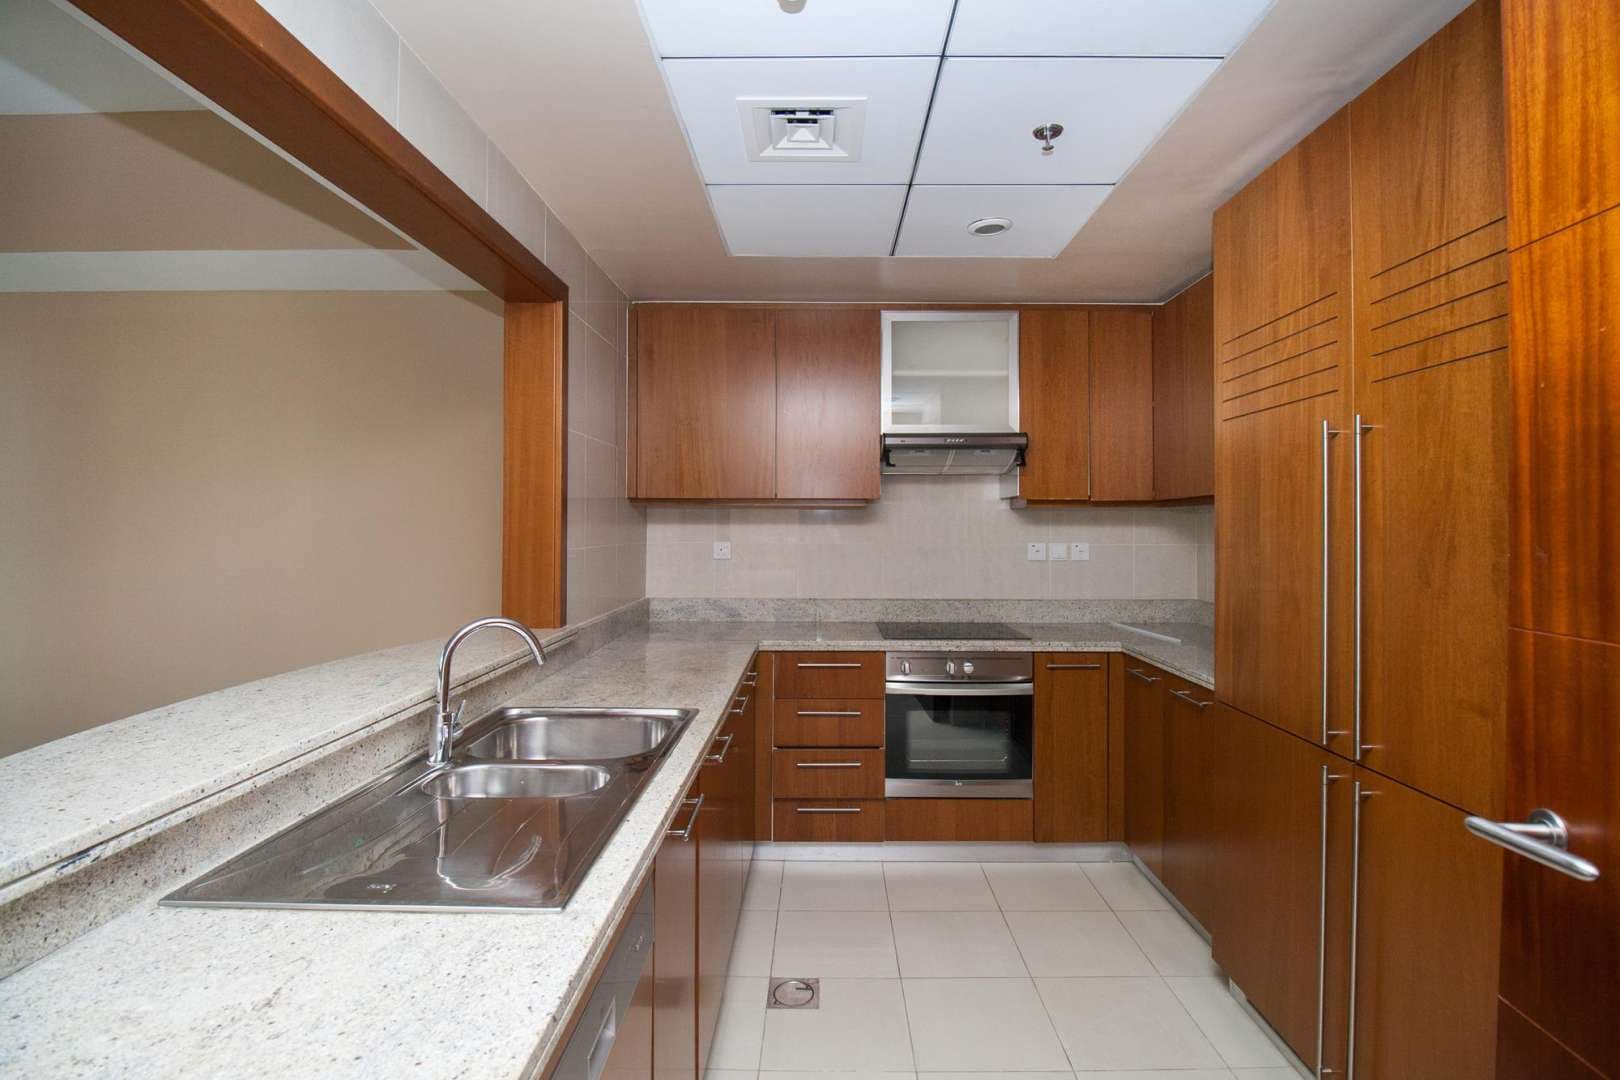 3 Bedroom Apartment For Rent Standpoint Tower A Lp05393 113549510abd5900.jpg